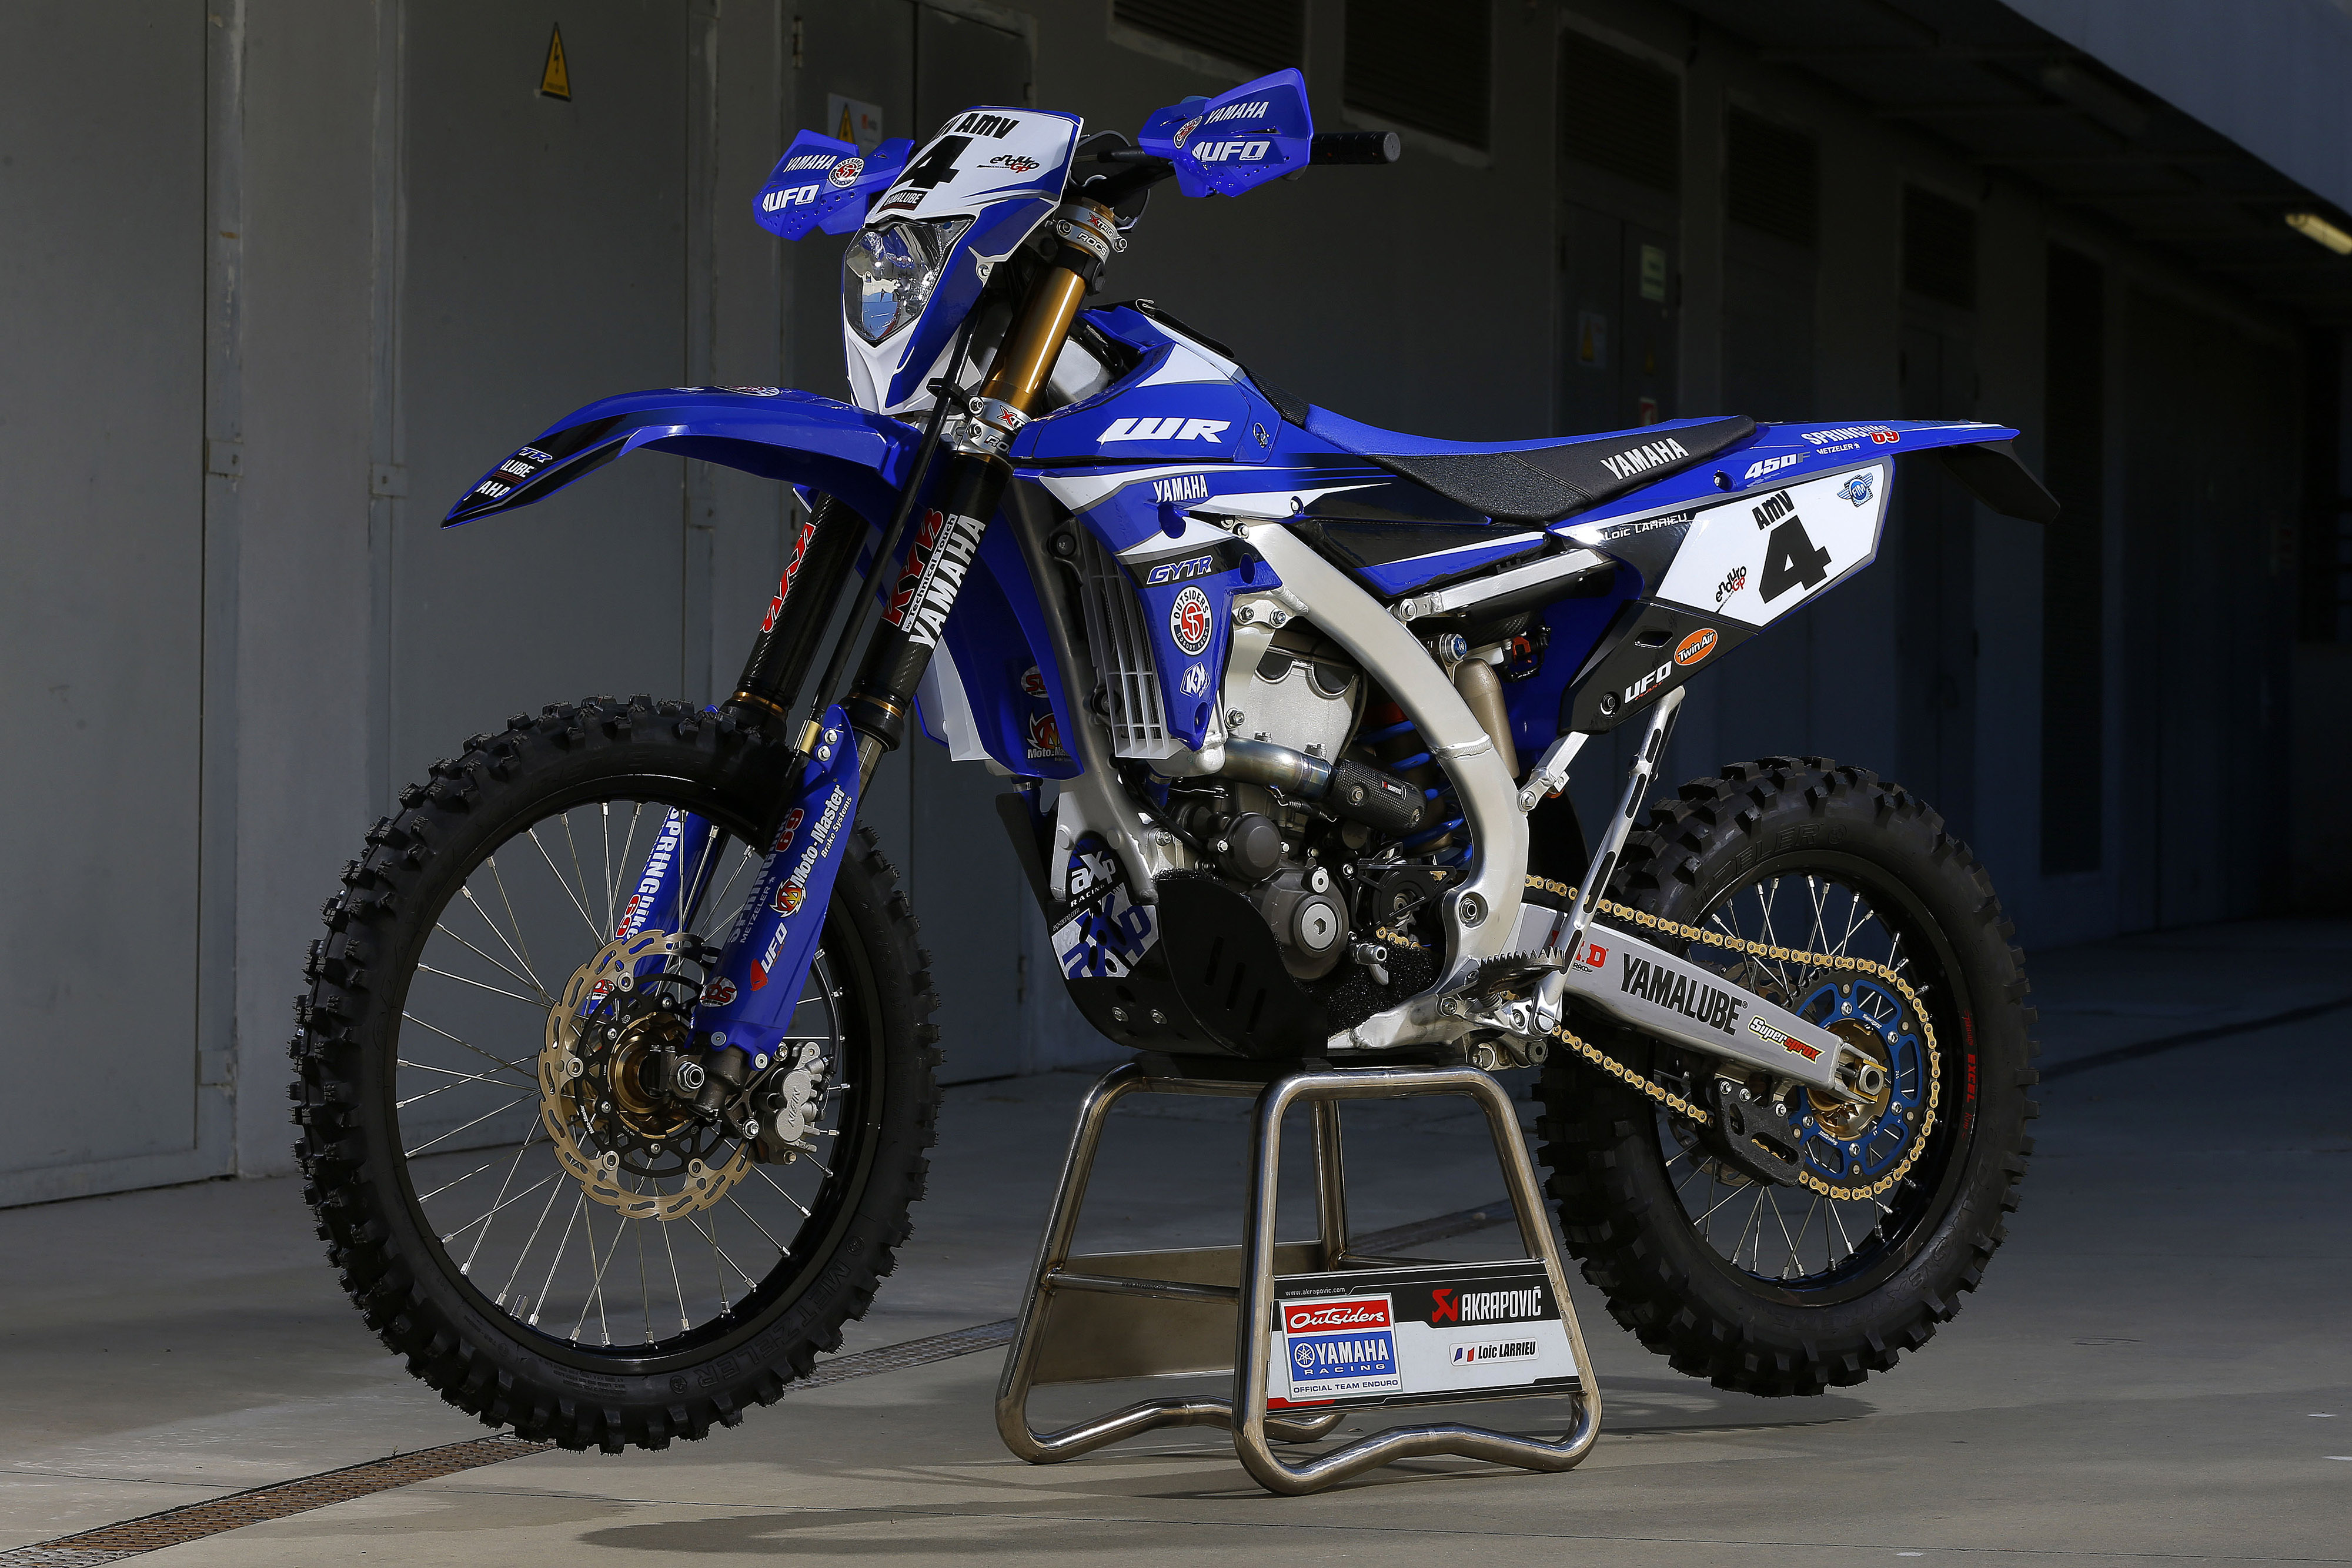 yamaha wr450f Cheaper Than Retail Price> Buy Clothing, Accessories and